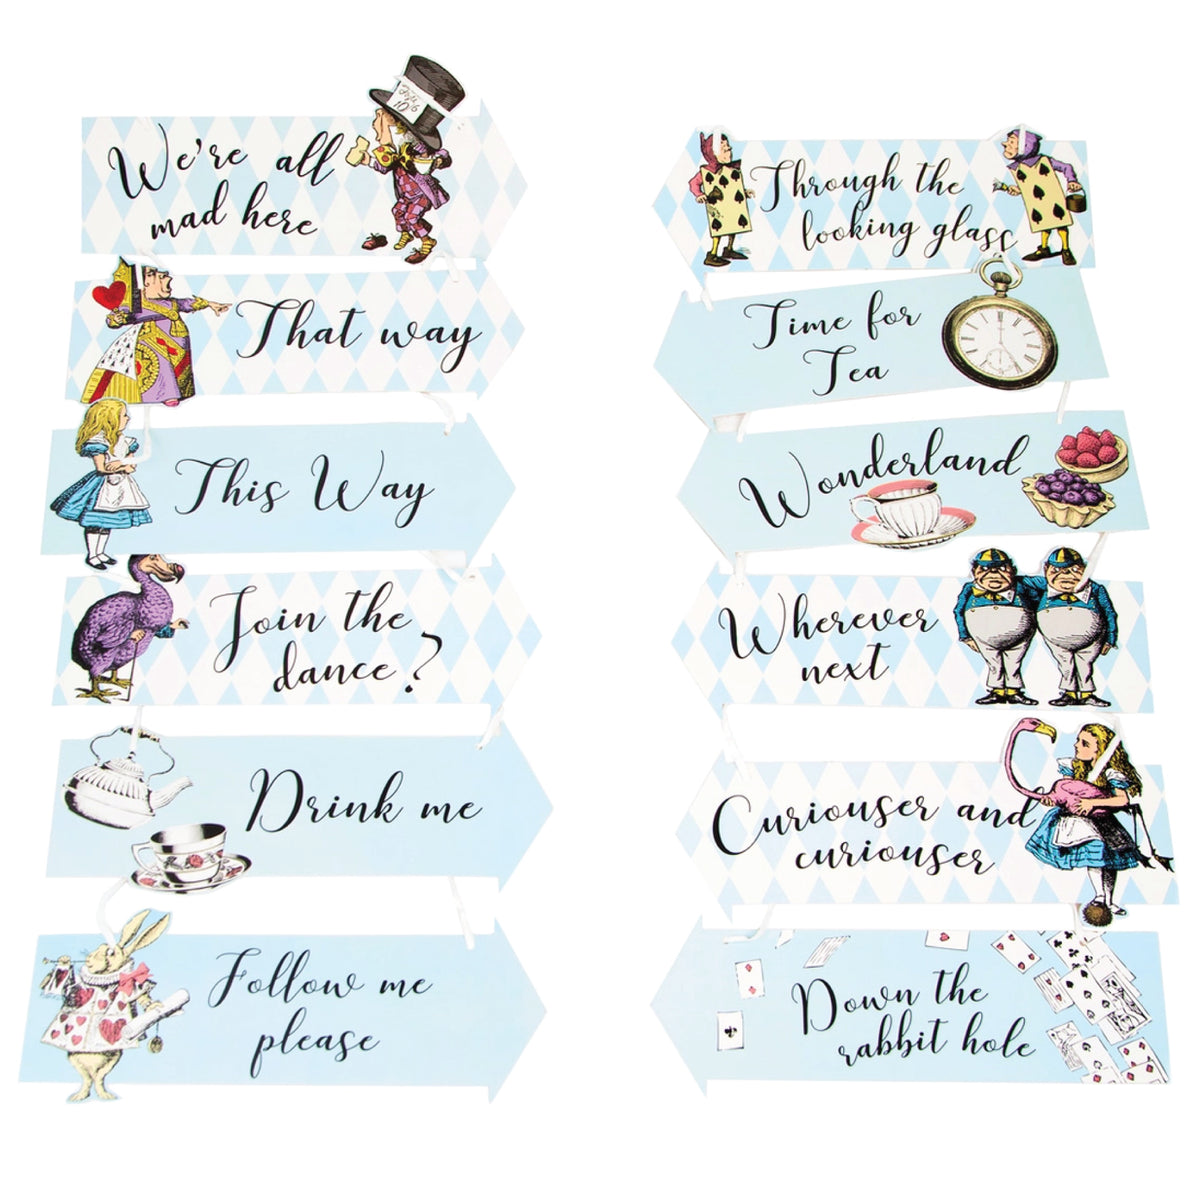 Alice in wonderland party decorations and more - Scrapbooking